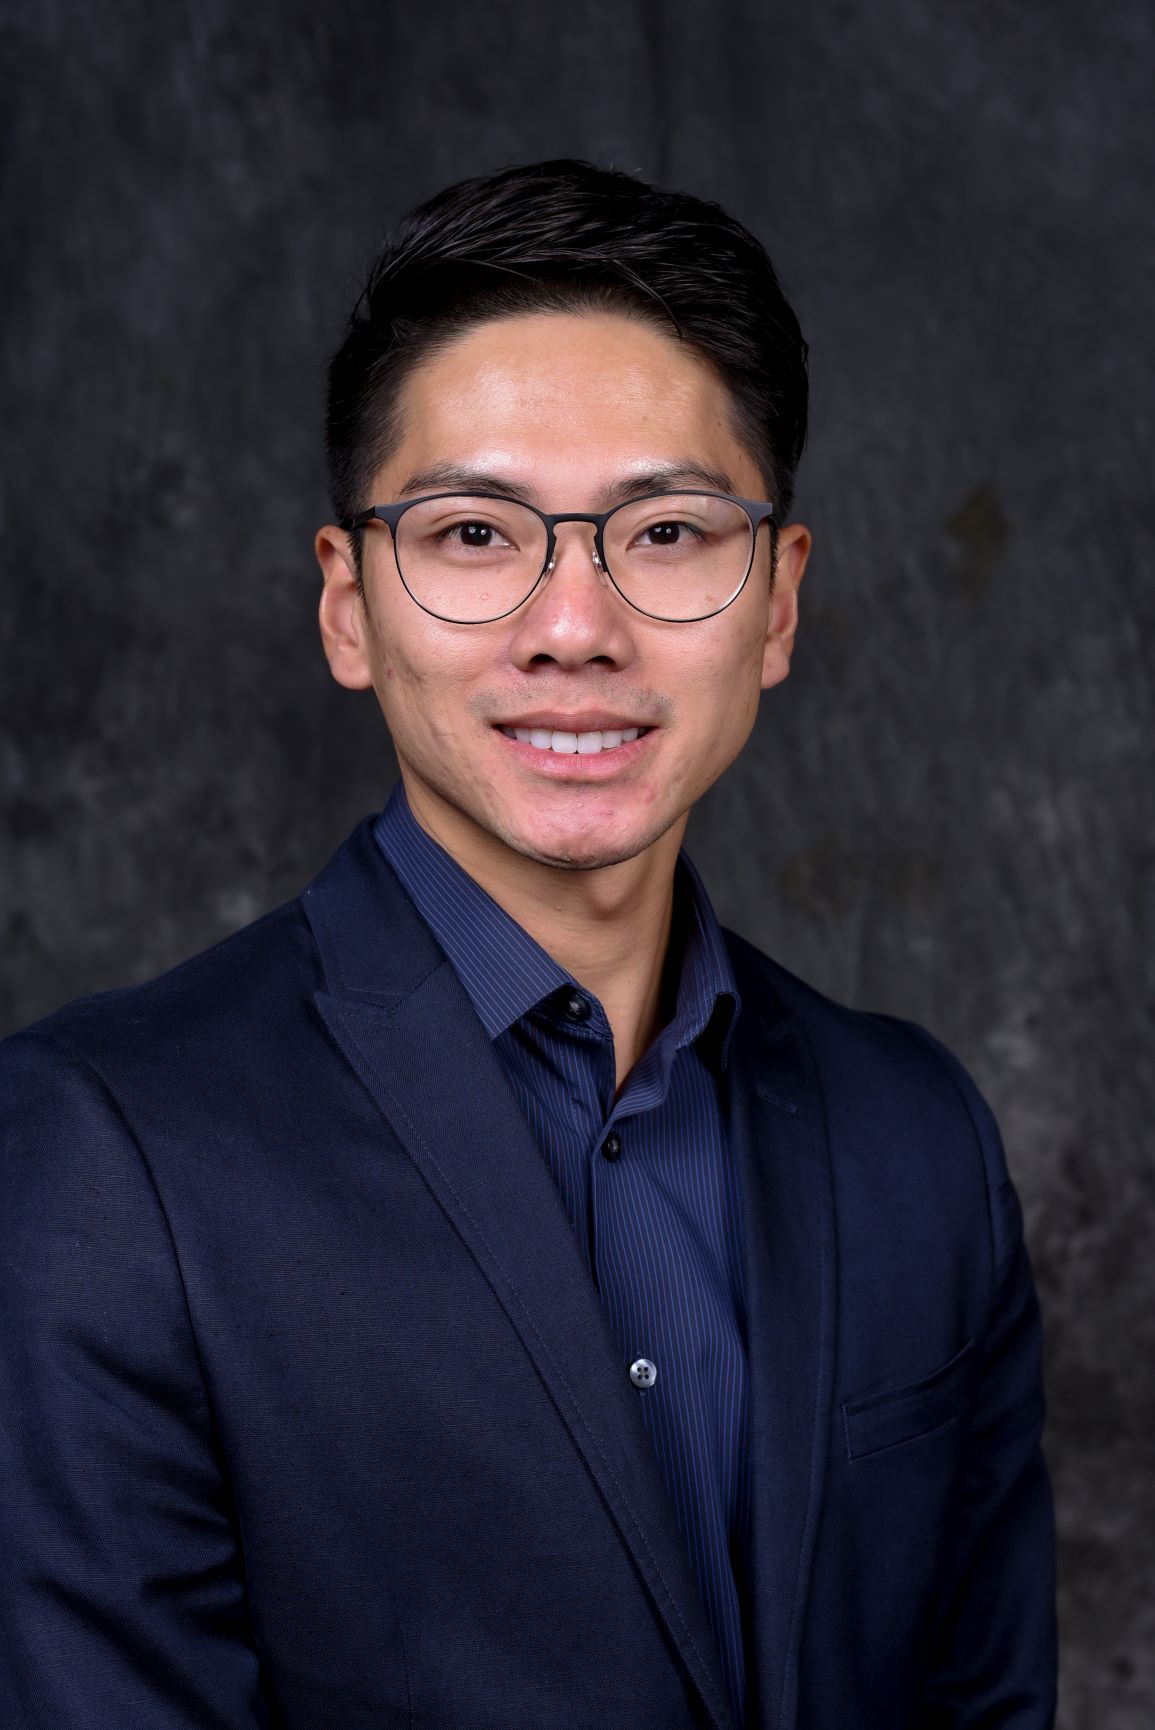 Headshot of APCC Director, Nathan Nguyen. Nathan is smiling, wearing glasses and a suit.